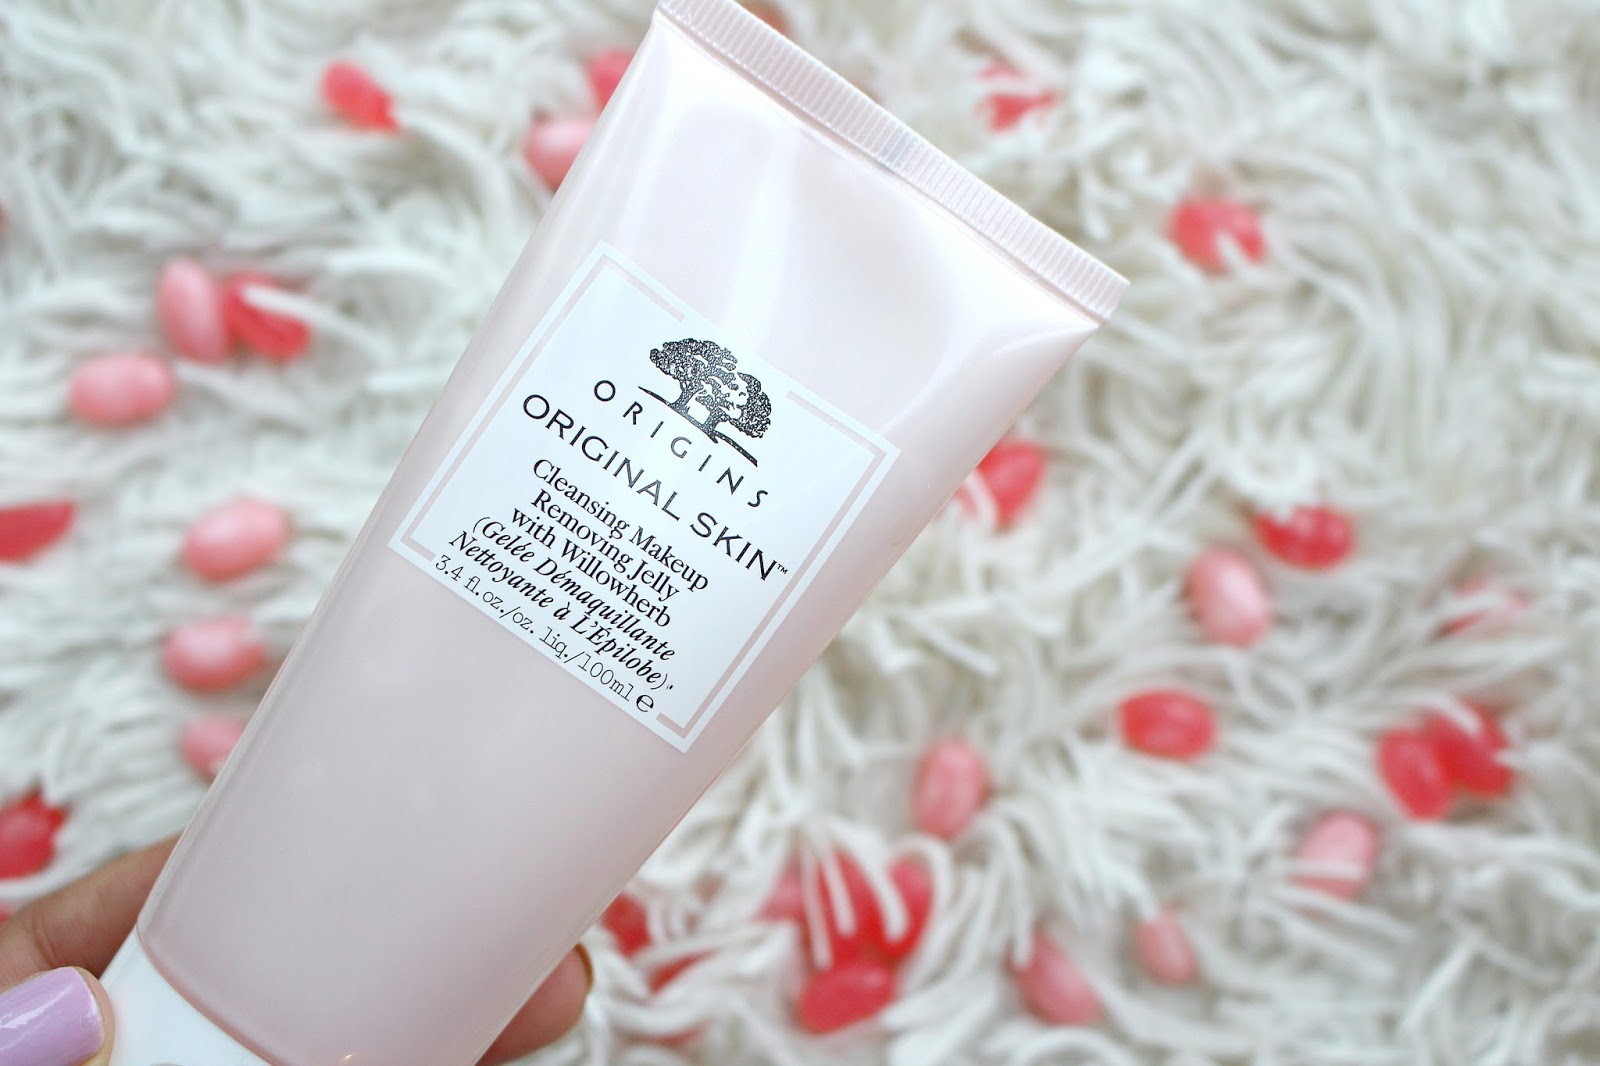 Samantha Origins Cleansing Makeup Removing Jelly Review